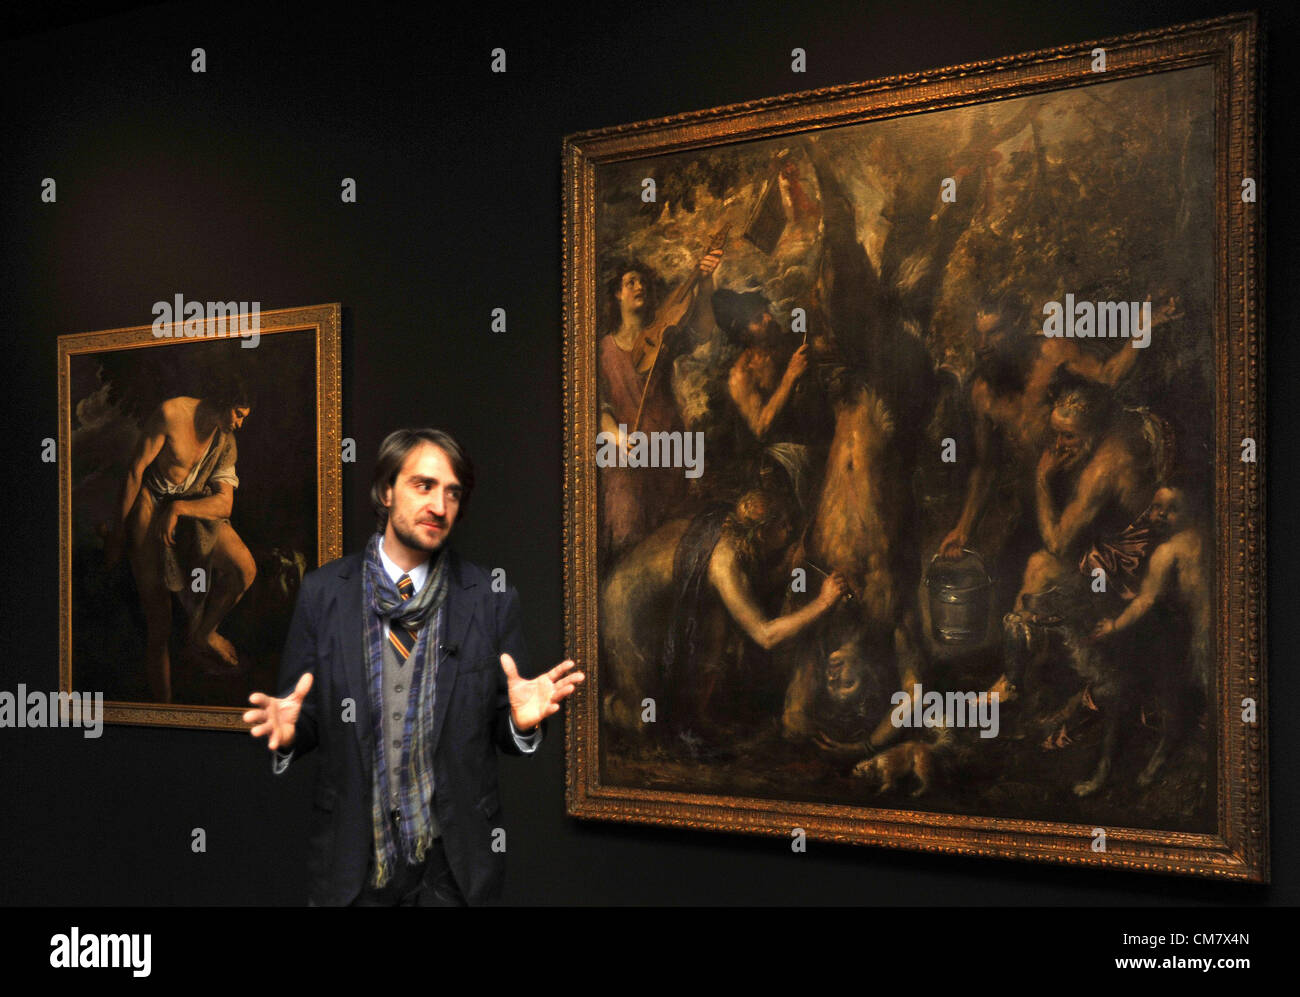 Olomouc, Czech Republic, October 24, 2012. Curator Ondrej Zatloukal is seen in front of one of the most expensive works of art in the Czech Republic called The Flaying of Marsyas by Titian during the exhibition From Titian to Warhol in Olomouc Museum of Art in Olomouc, Czech Republic, October 24, 2012.(CTK Photo/Vladislav Galgonek) Stock Photo